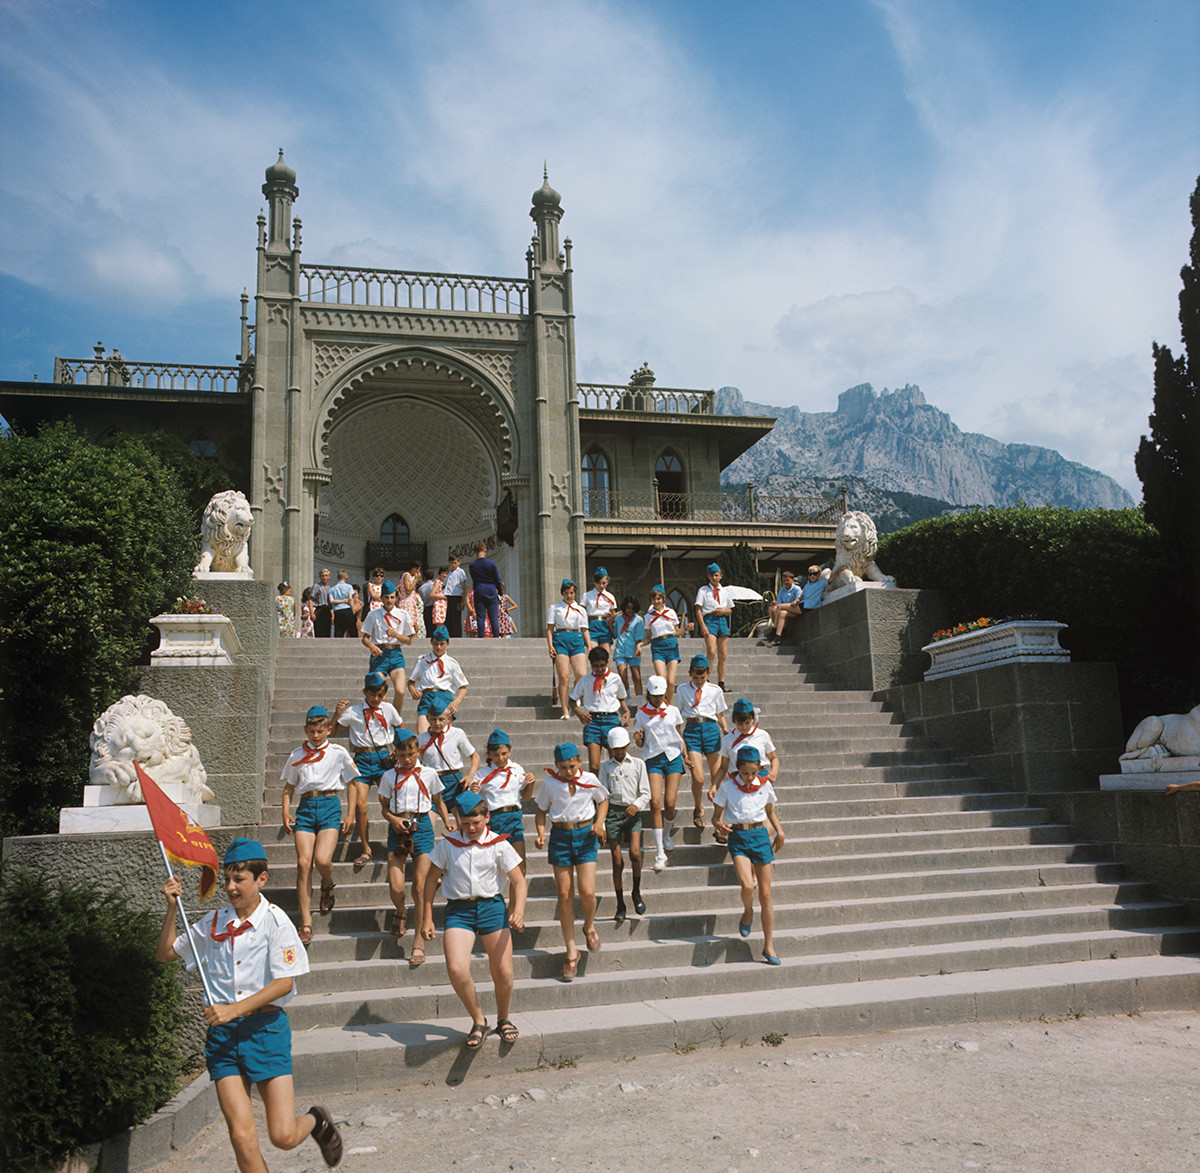 Pioneers on an excursion to Vorontsov Palace, Crimea, 1970  